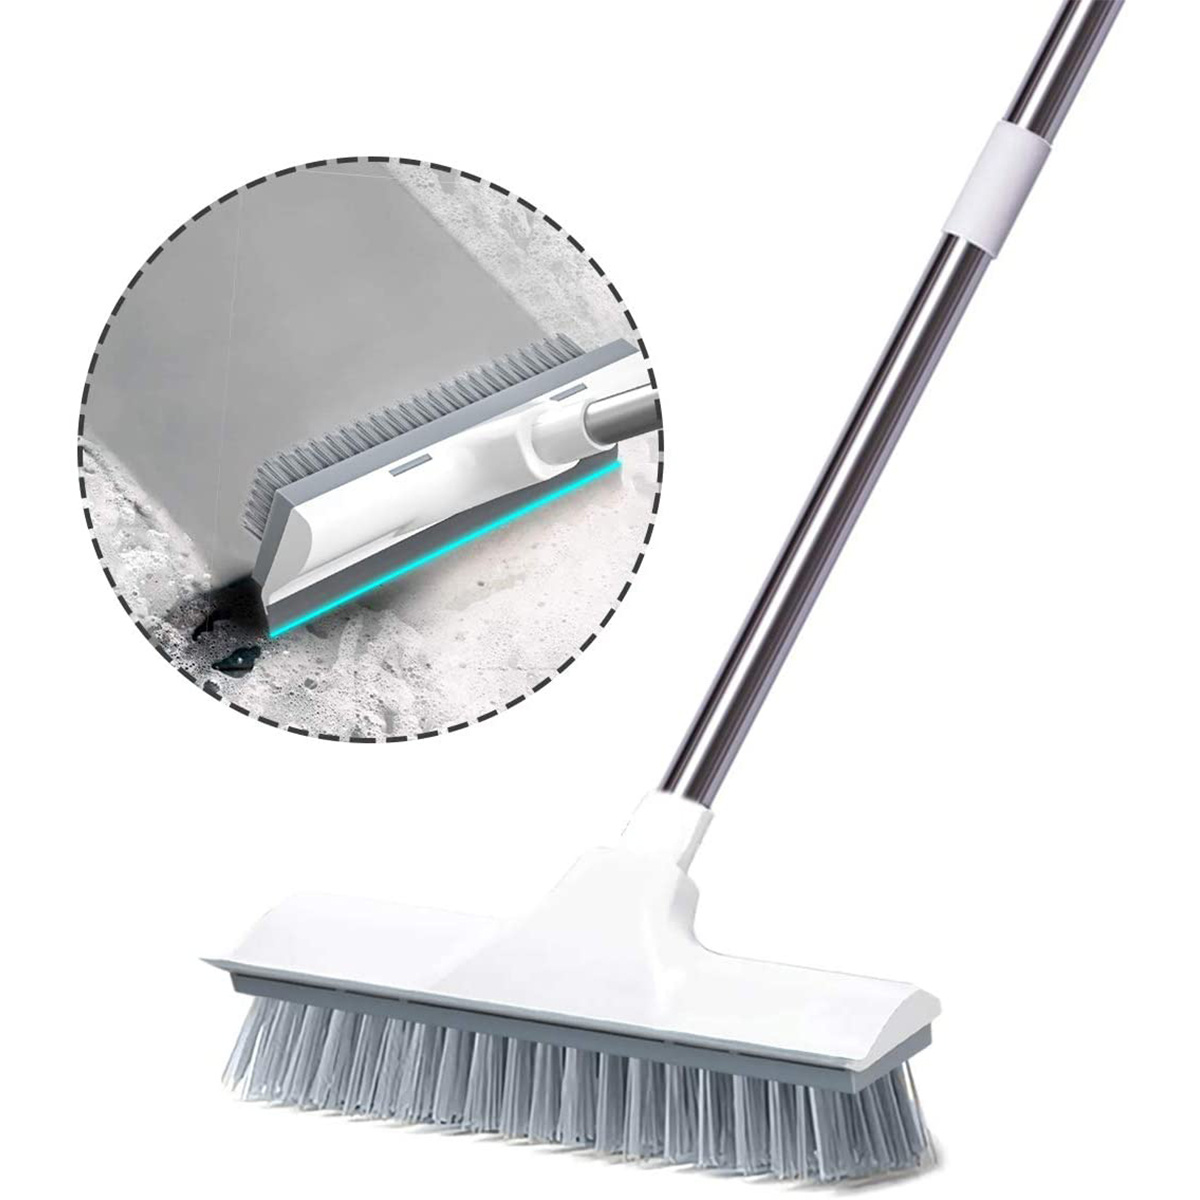 Floor Brush Crevice Cleaning Brush in Long Handle Rotating for Bathroom Kitchen, Size: Two-Section Pole